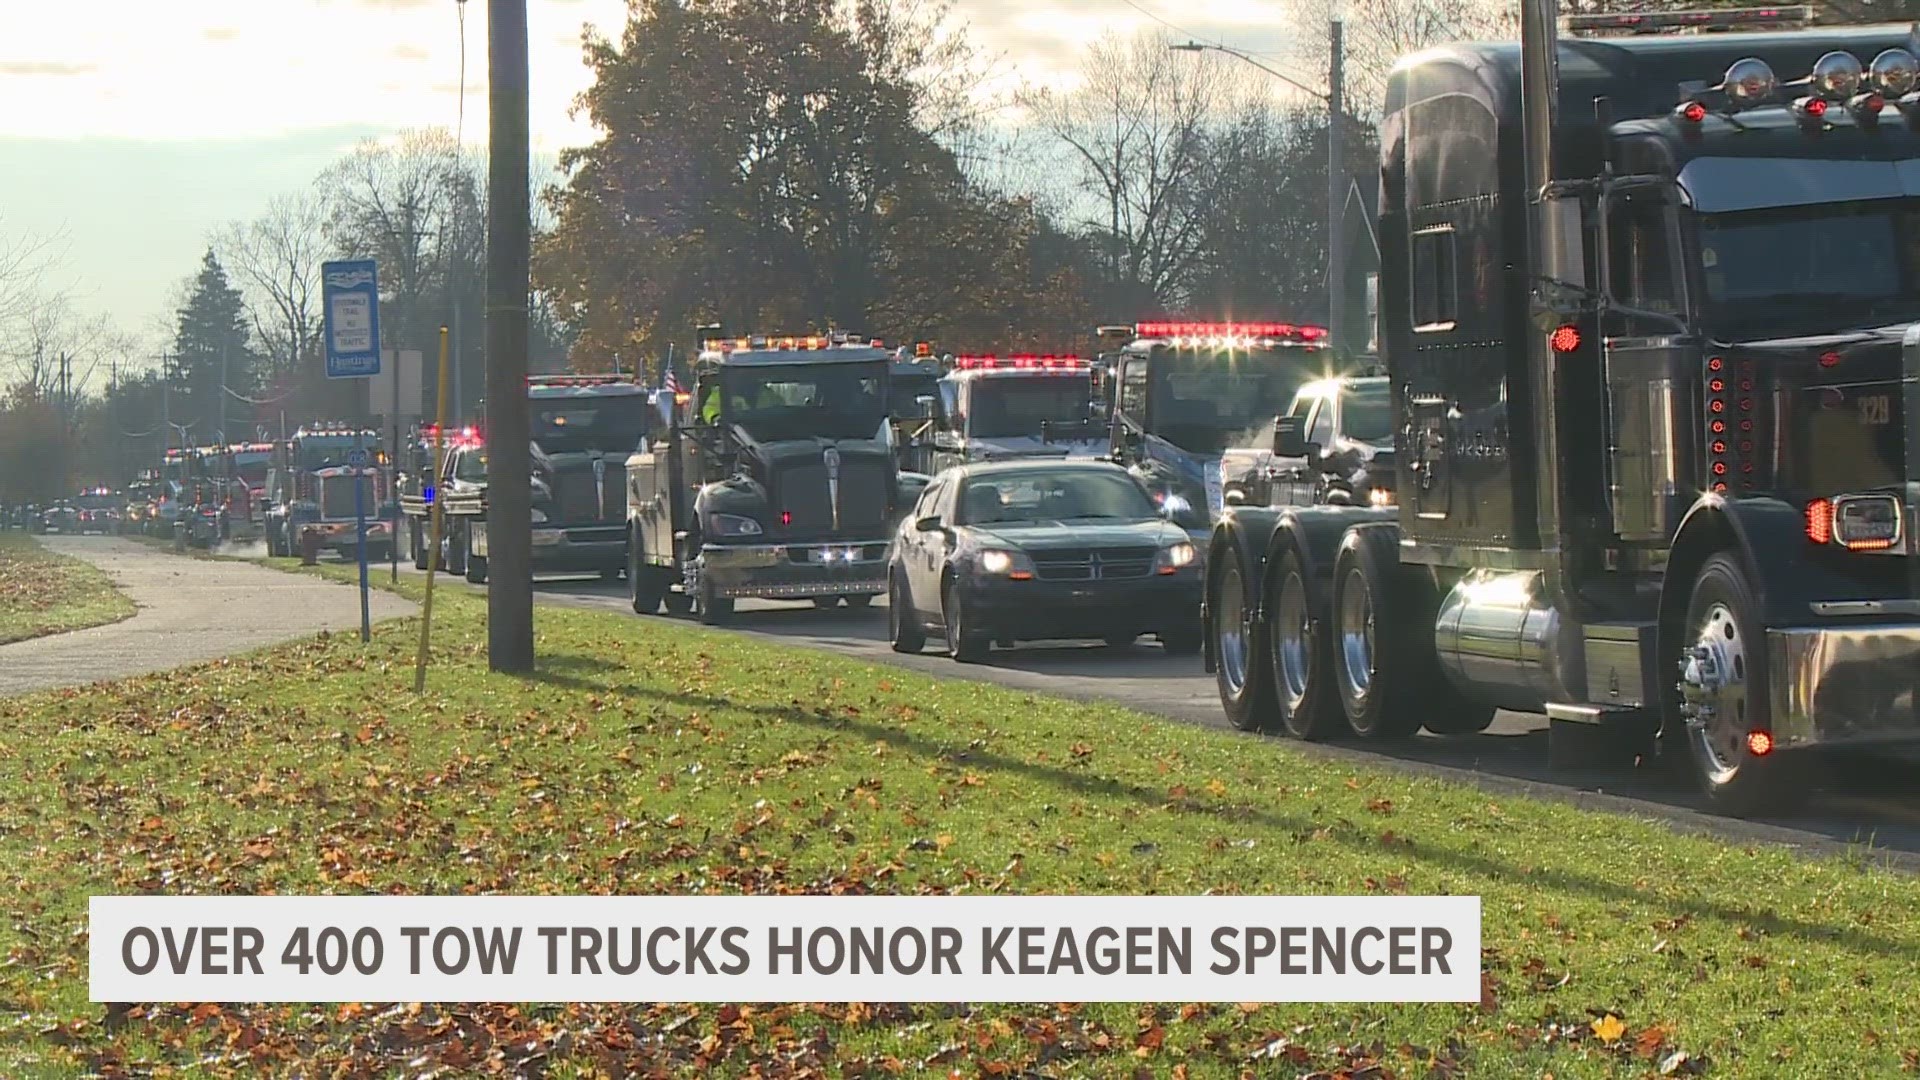 Tow trucks from across the nation gathered in a procession to pay their respects to Spencer and emphasize the importance of safe driving around tow truck drivers.